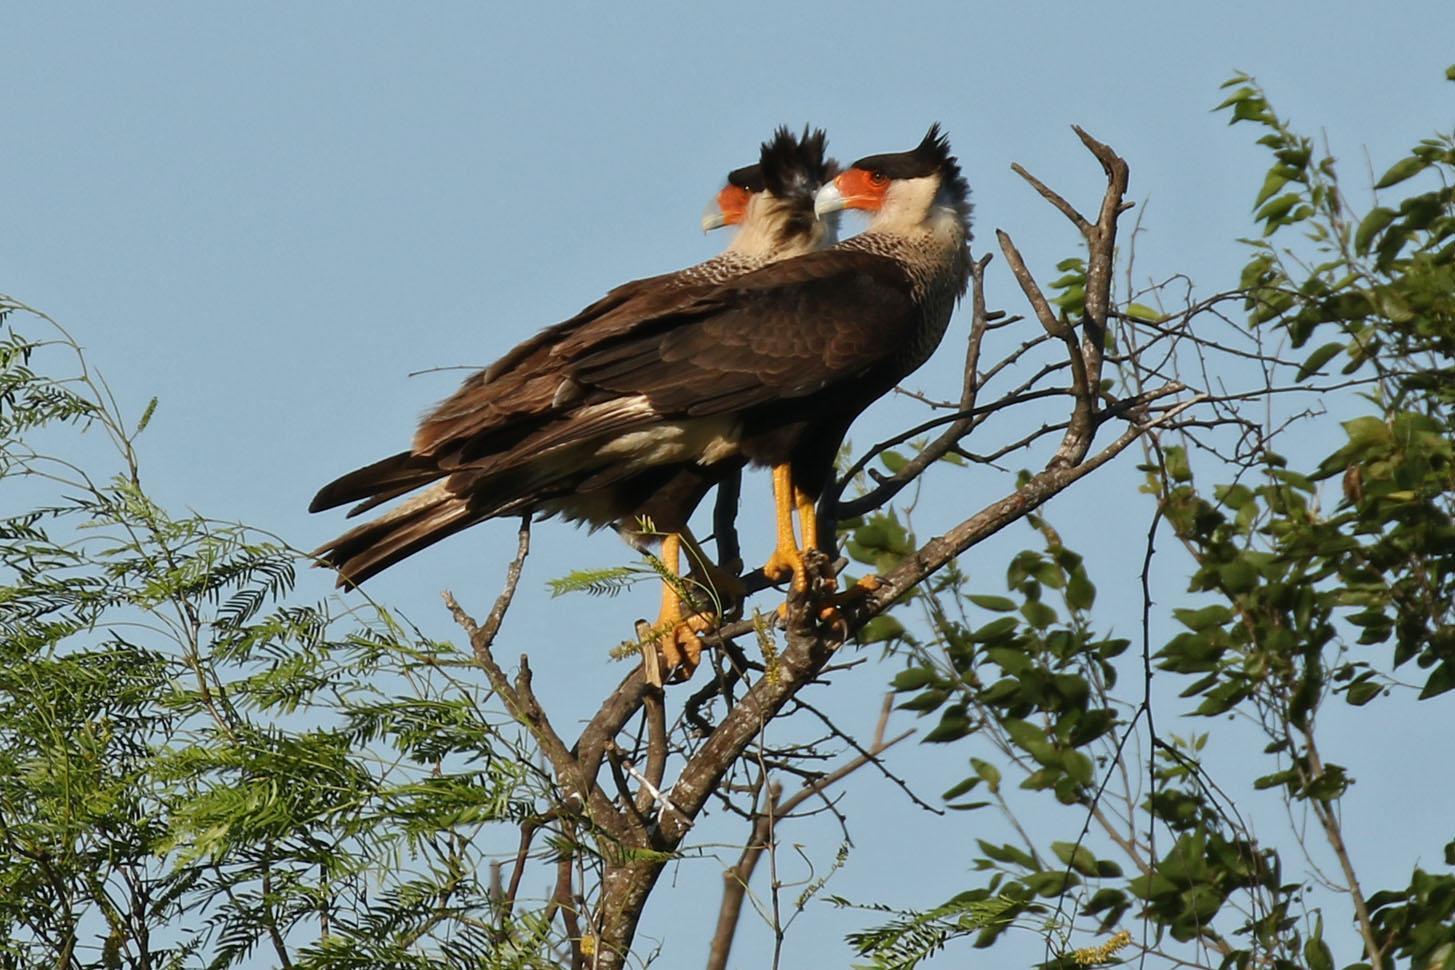 Crested Caracara Photo by Kristy Baker